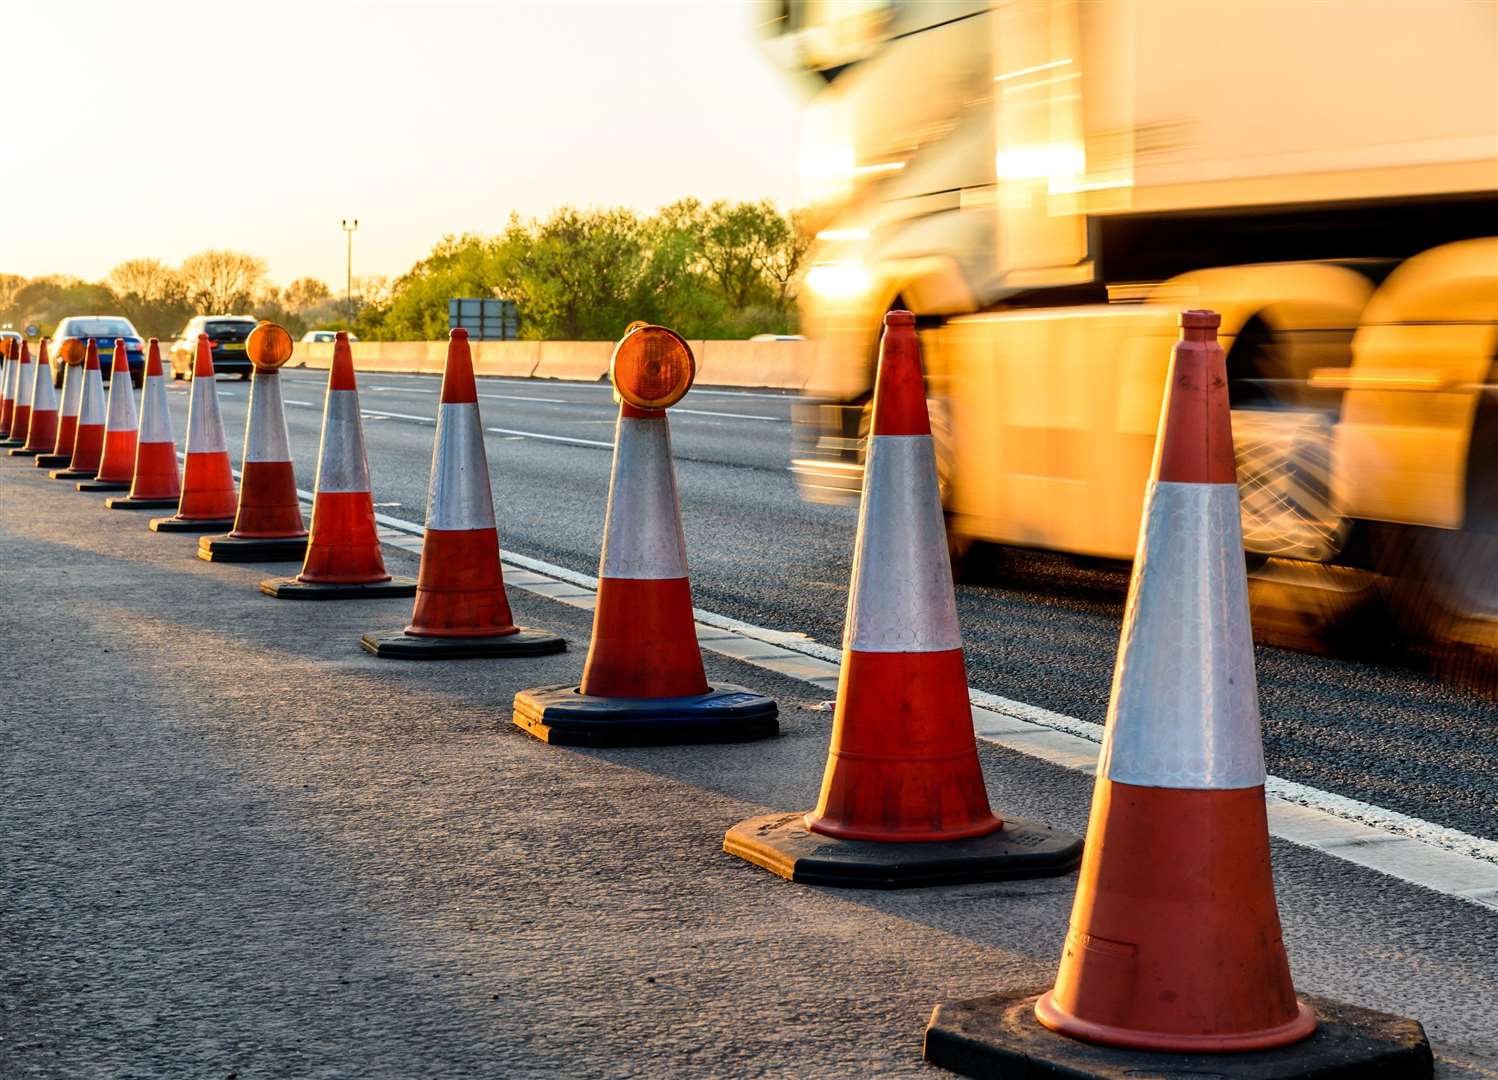 Construction work is taking place on the M20